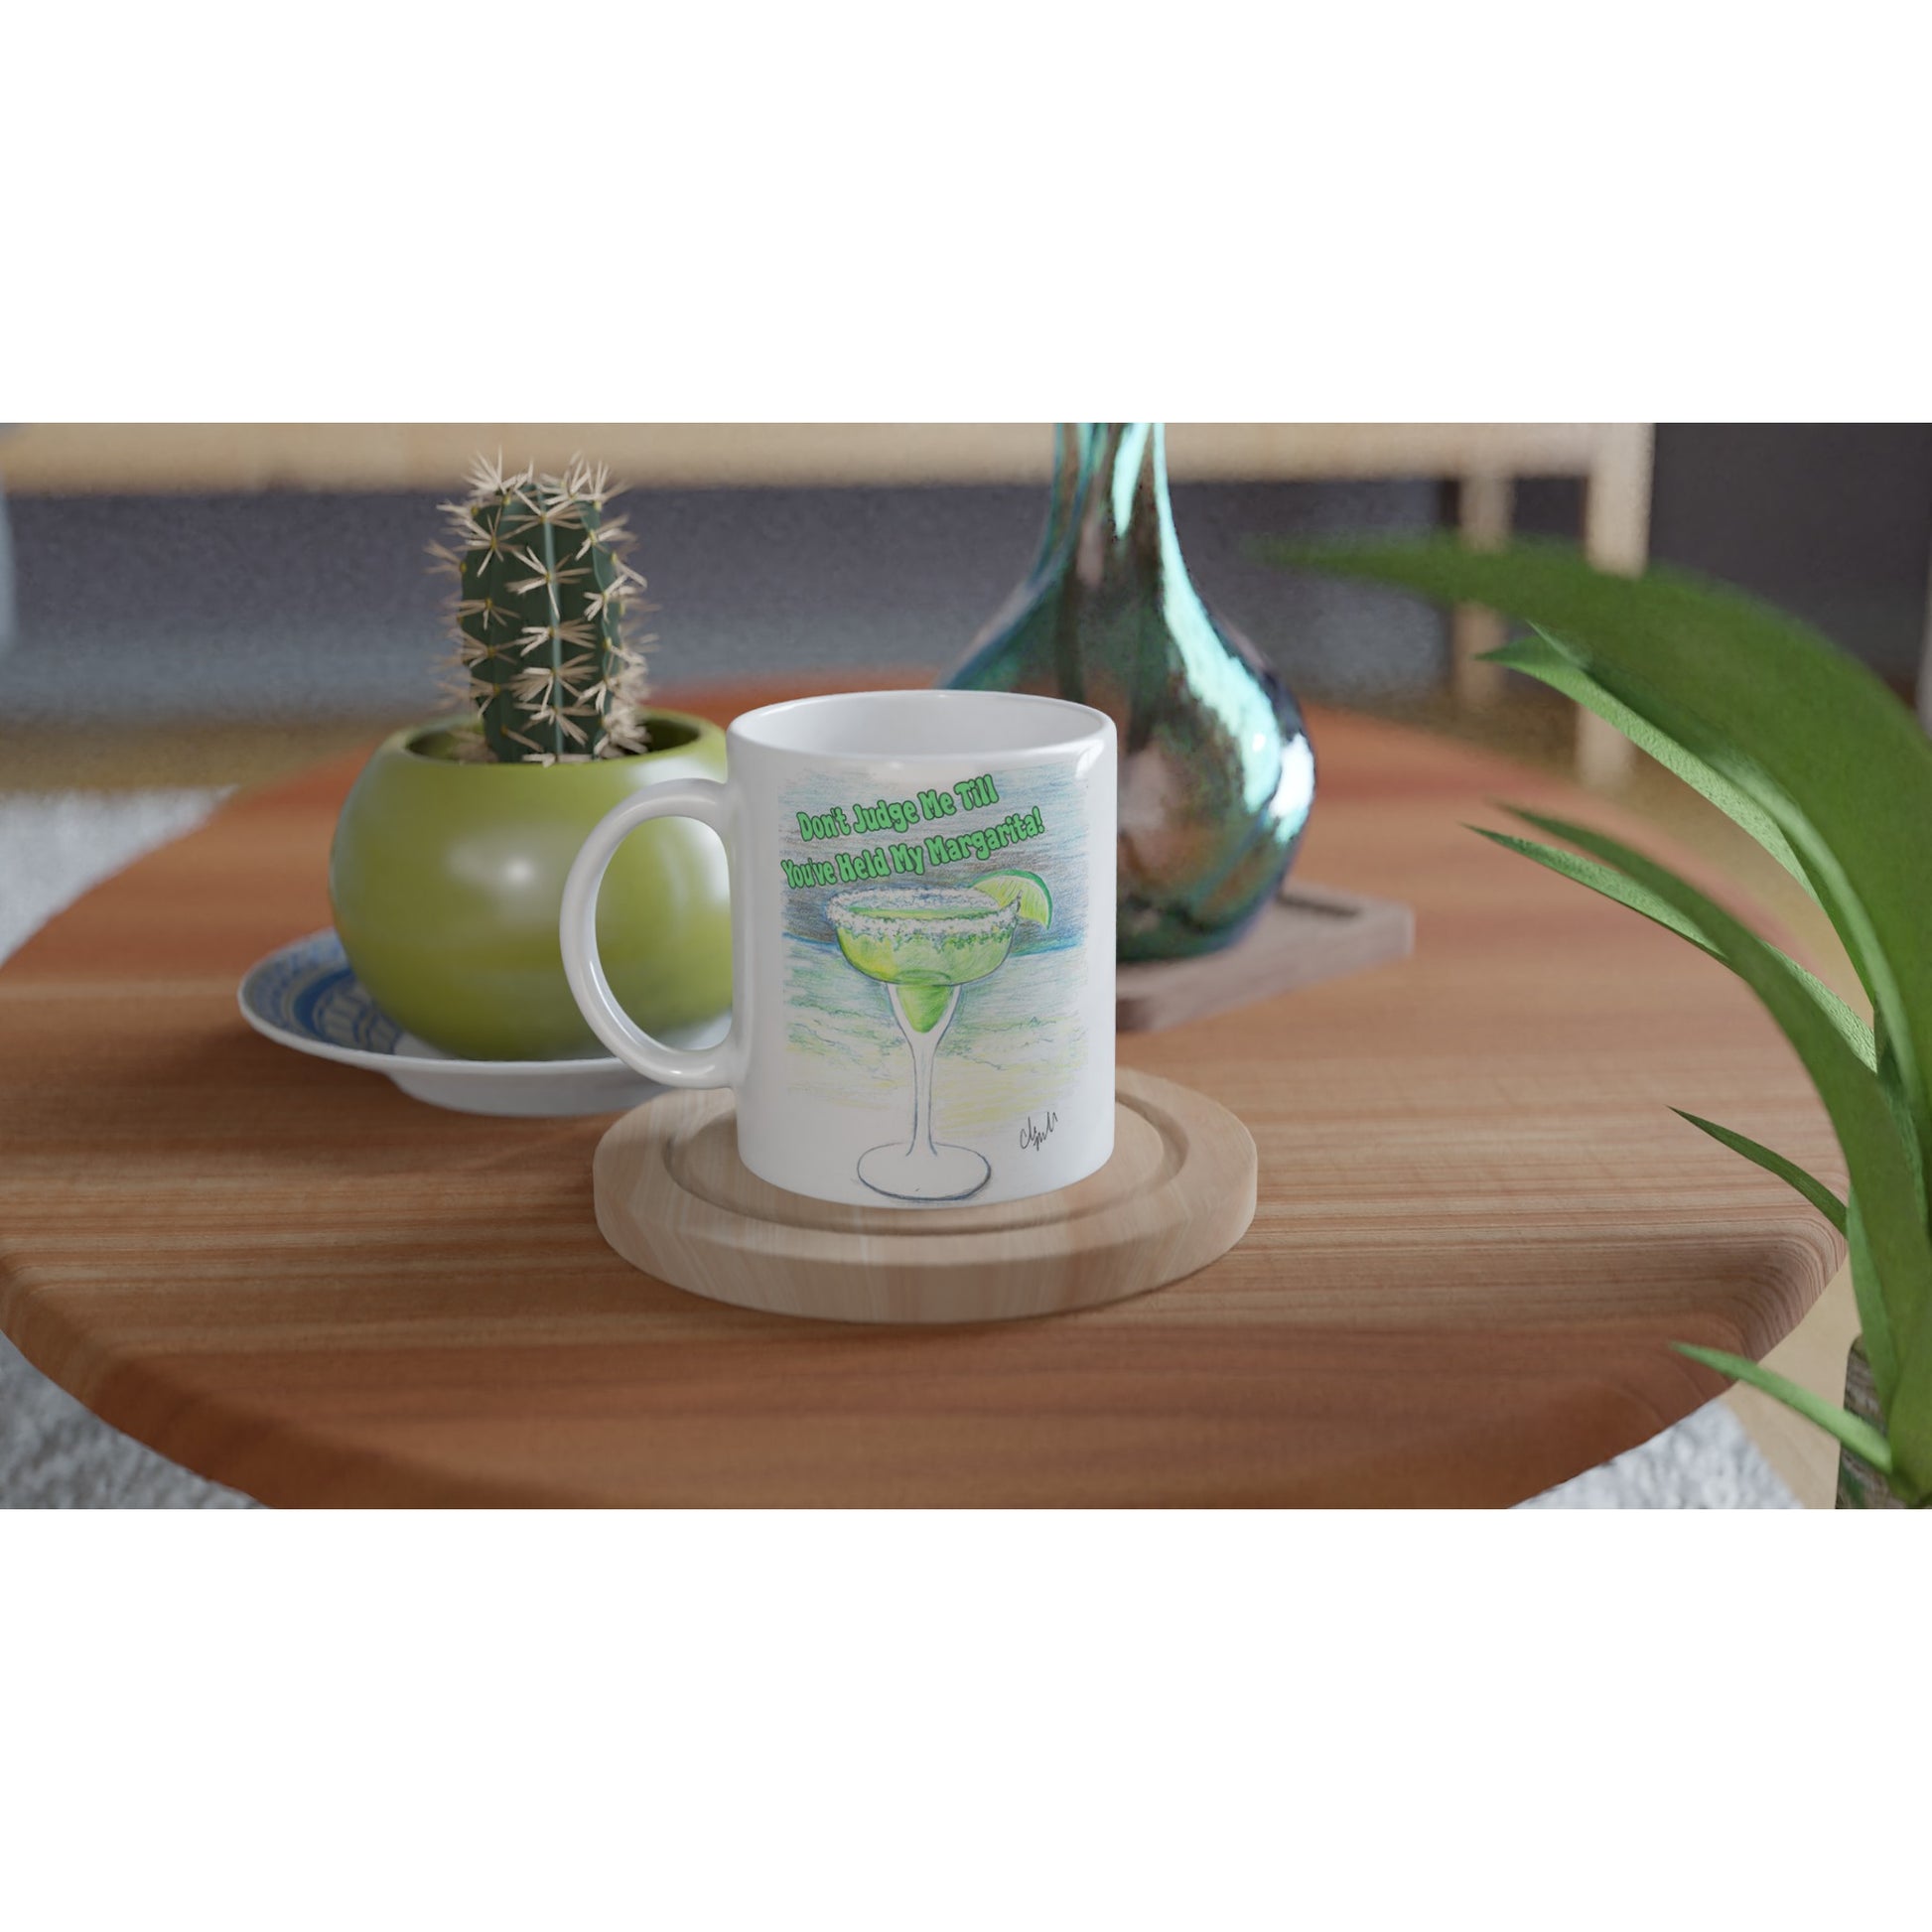 White ceramic 11oz mug with motto Don't Judge Me till You've Held my Margarita coffee mug dishwasher and microwave safe from WhatYa Say Apparel sitting on coaster on coffee table with green potted cactus and silver vase.